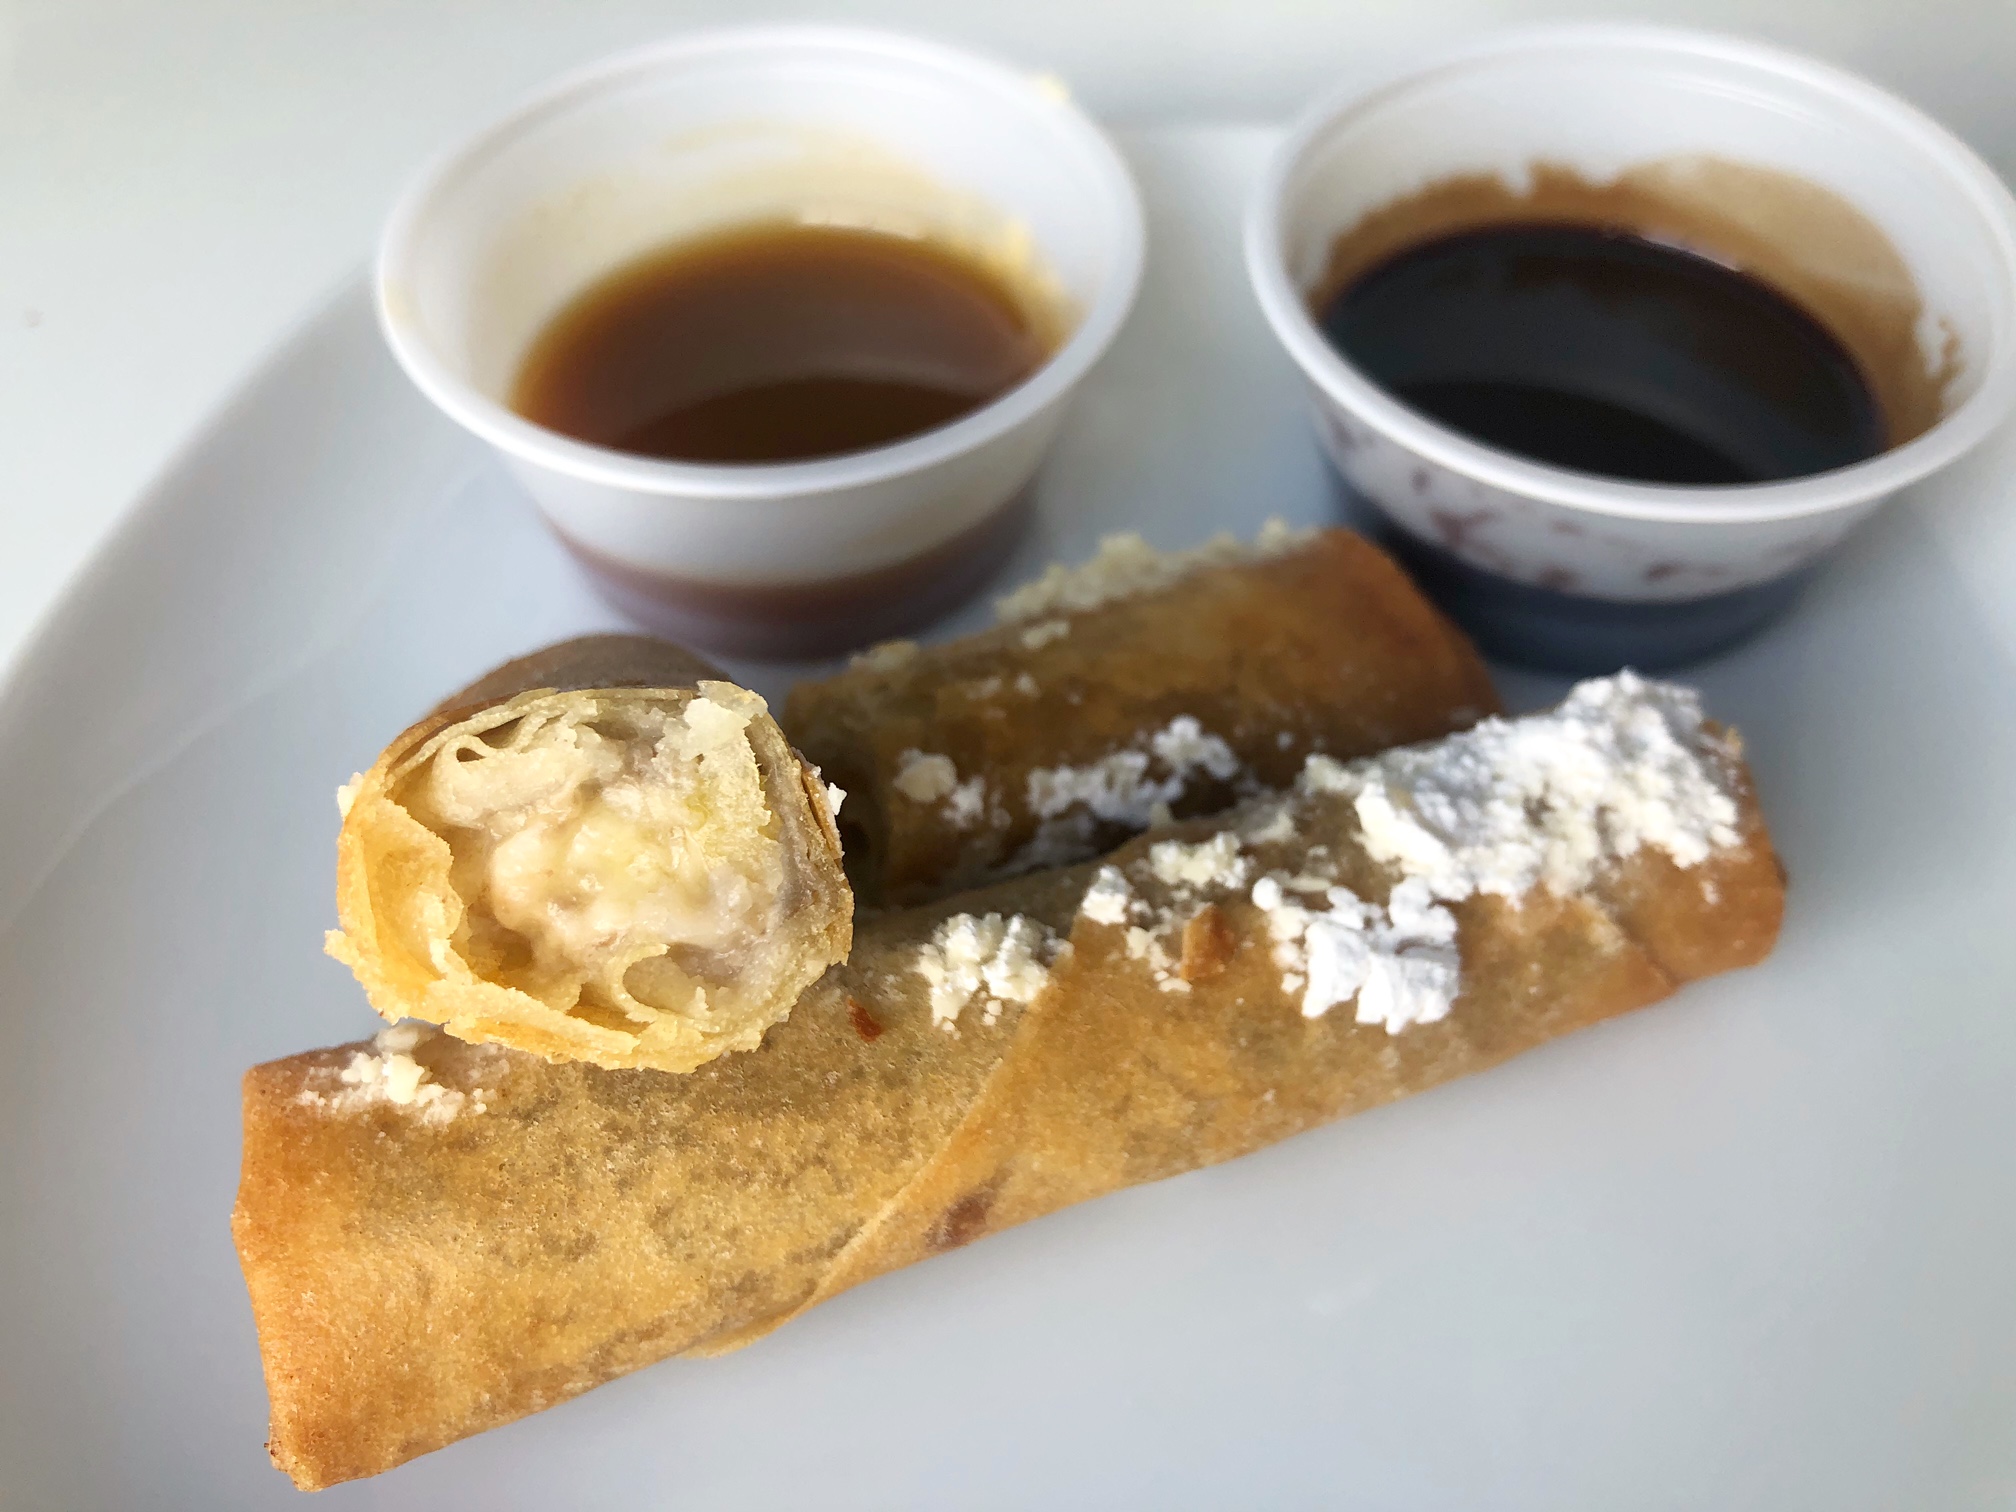 Two dessert egg rolls are on a plate, one sliced open to show the banana filling. Behind the white plate are two dipping sauces: caramel and chocolate. Photo by Alyssa Buckley.